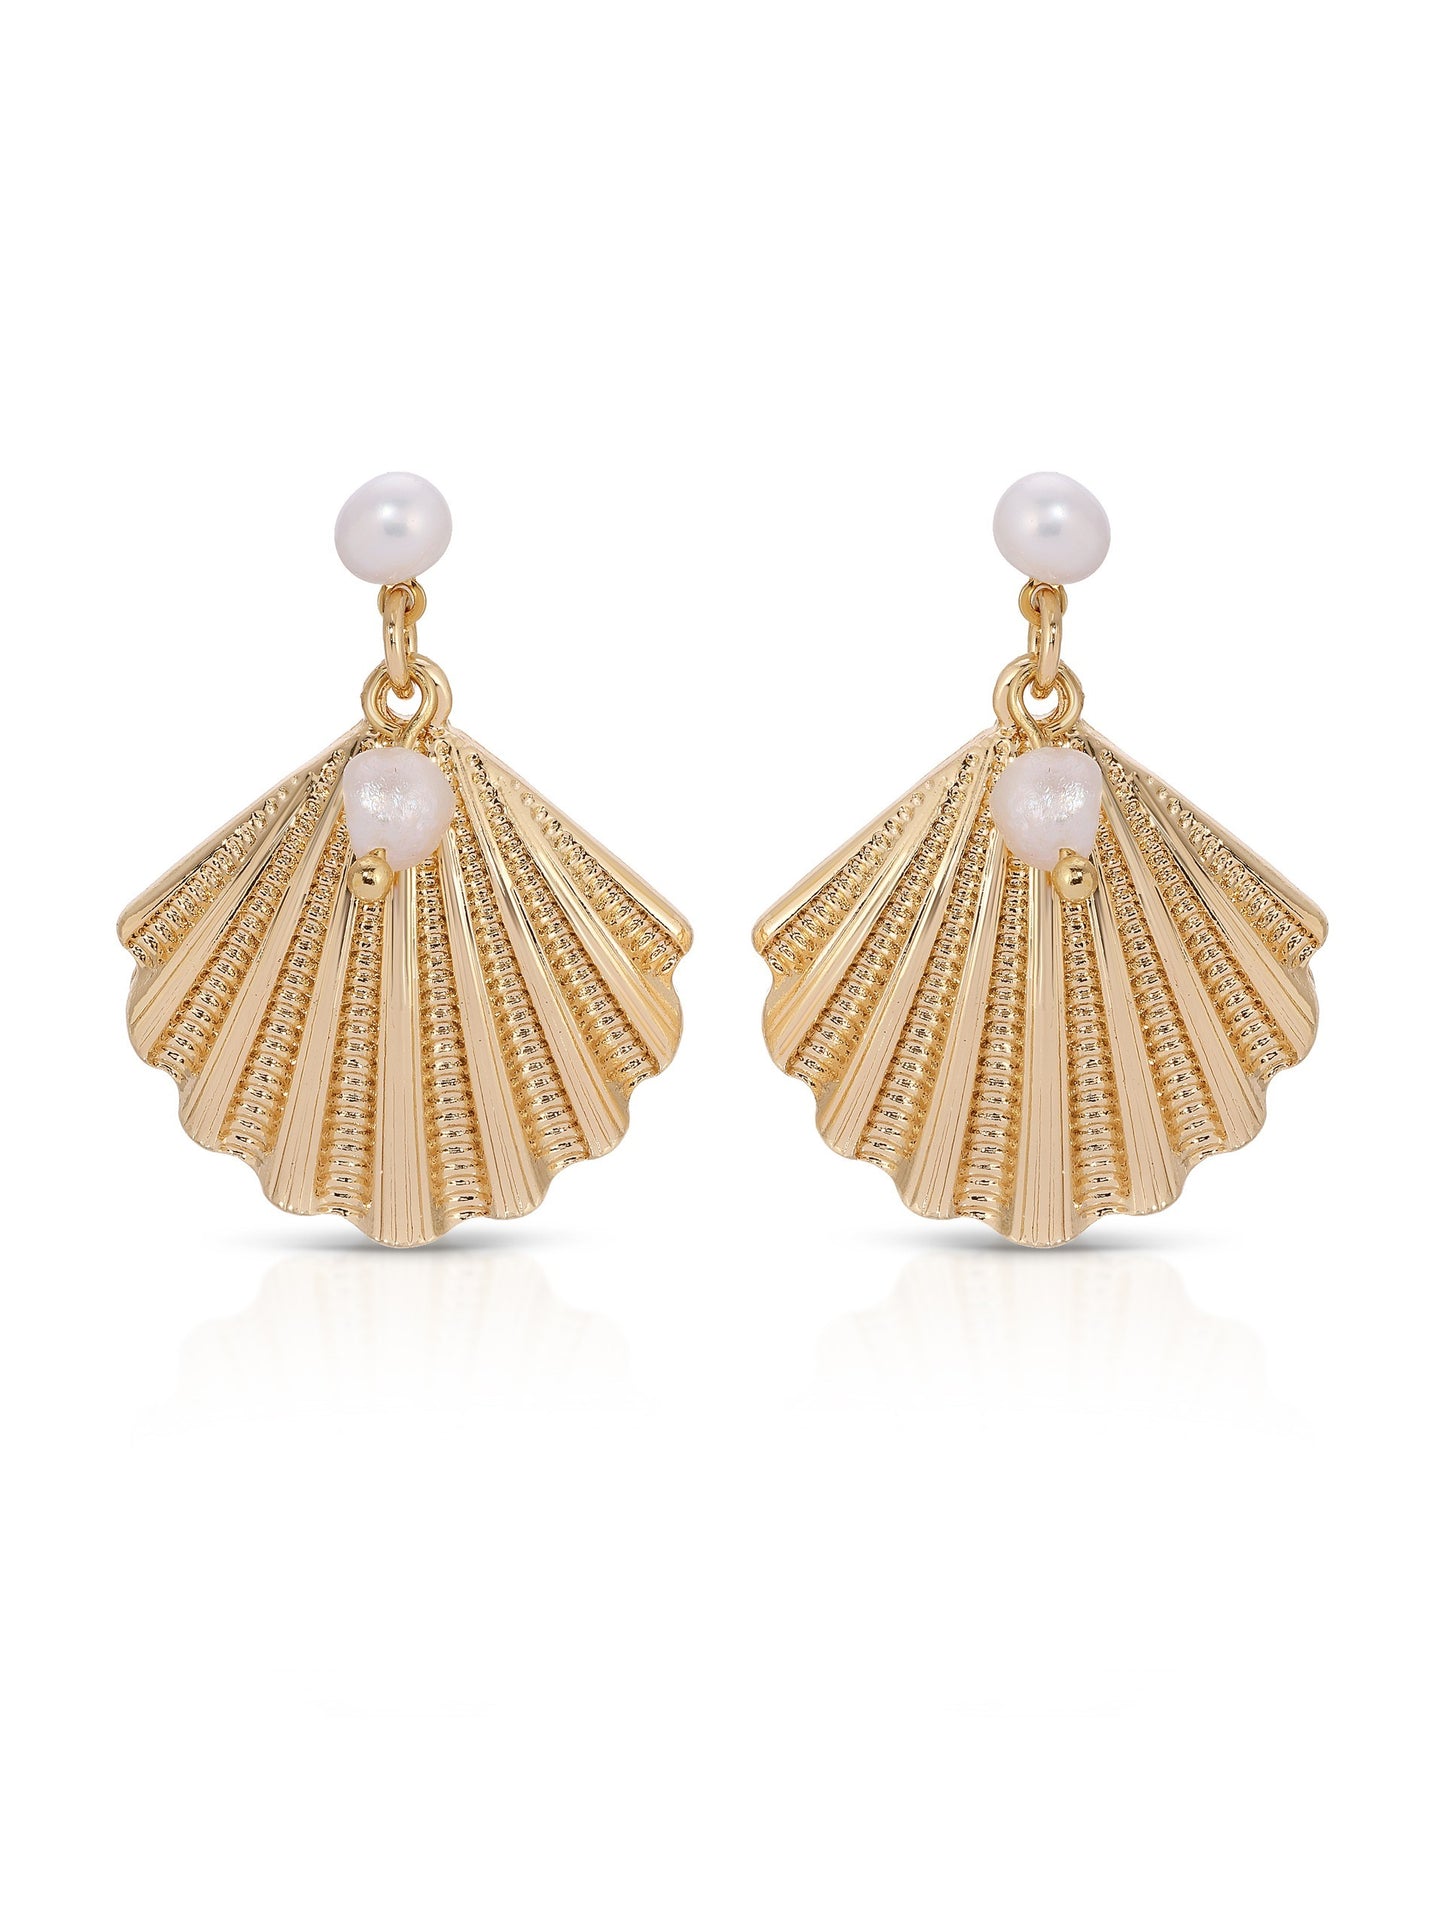 Scallop Shell and Pearl Earrings